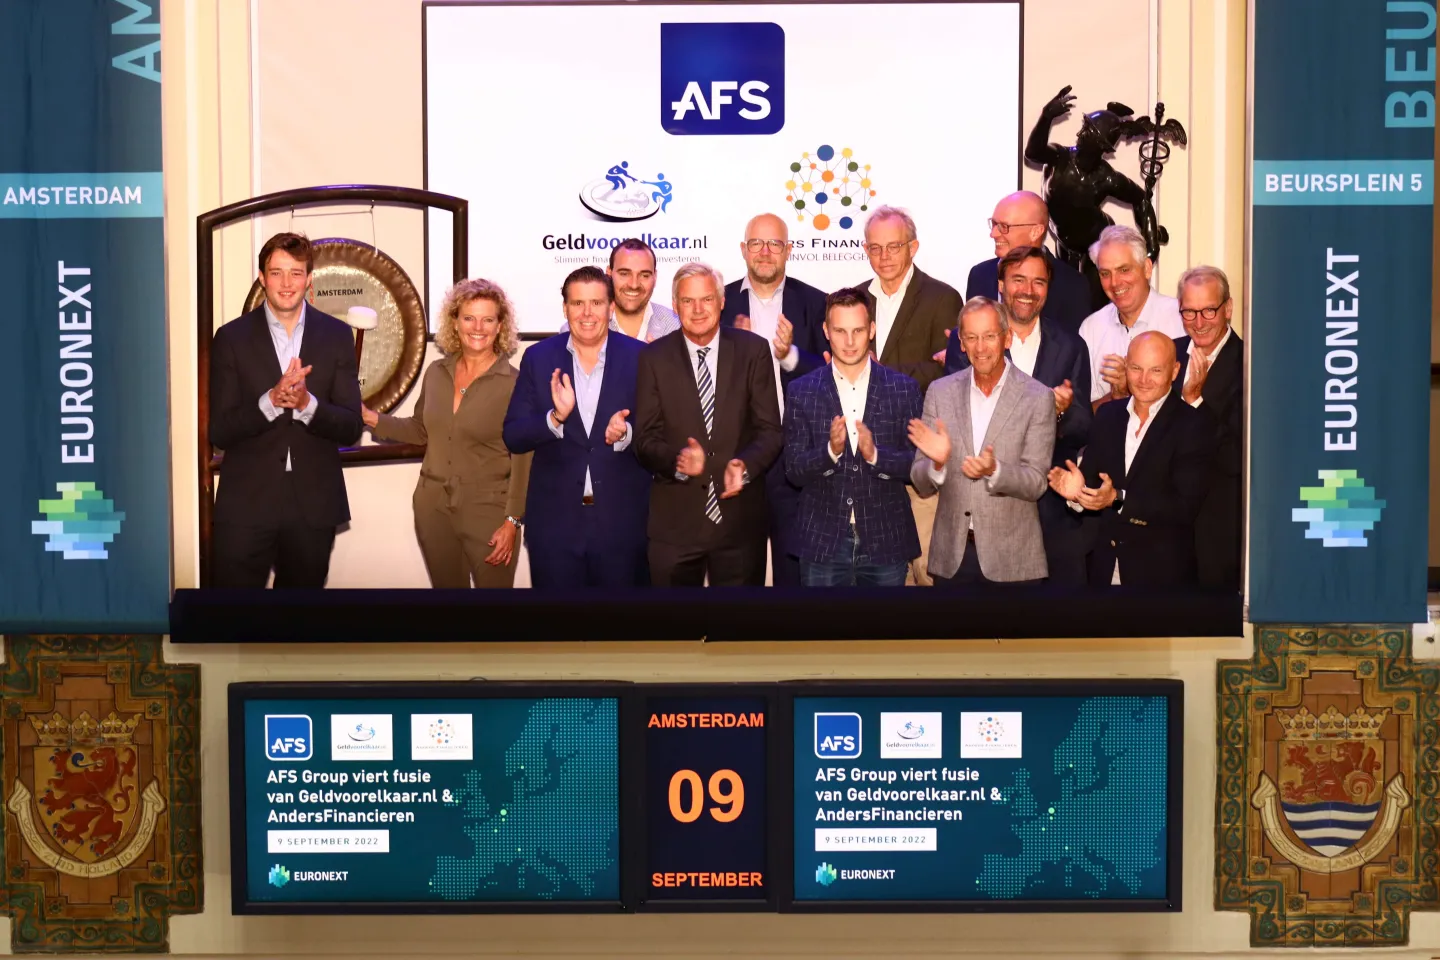 AFS Group - Euronext Amsterdam